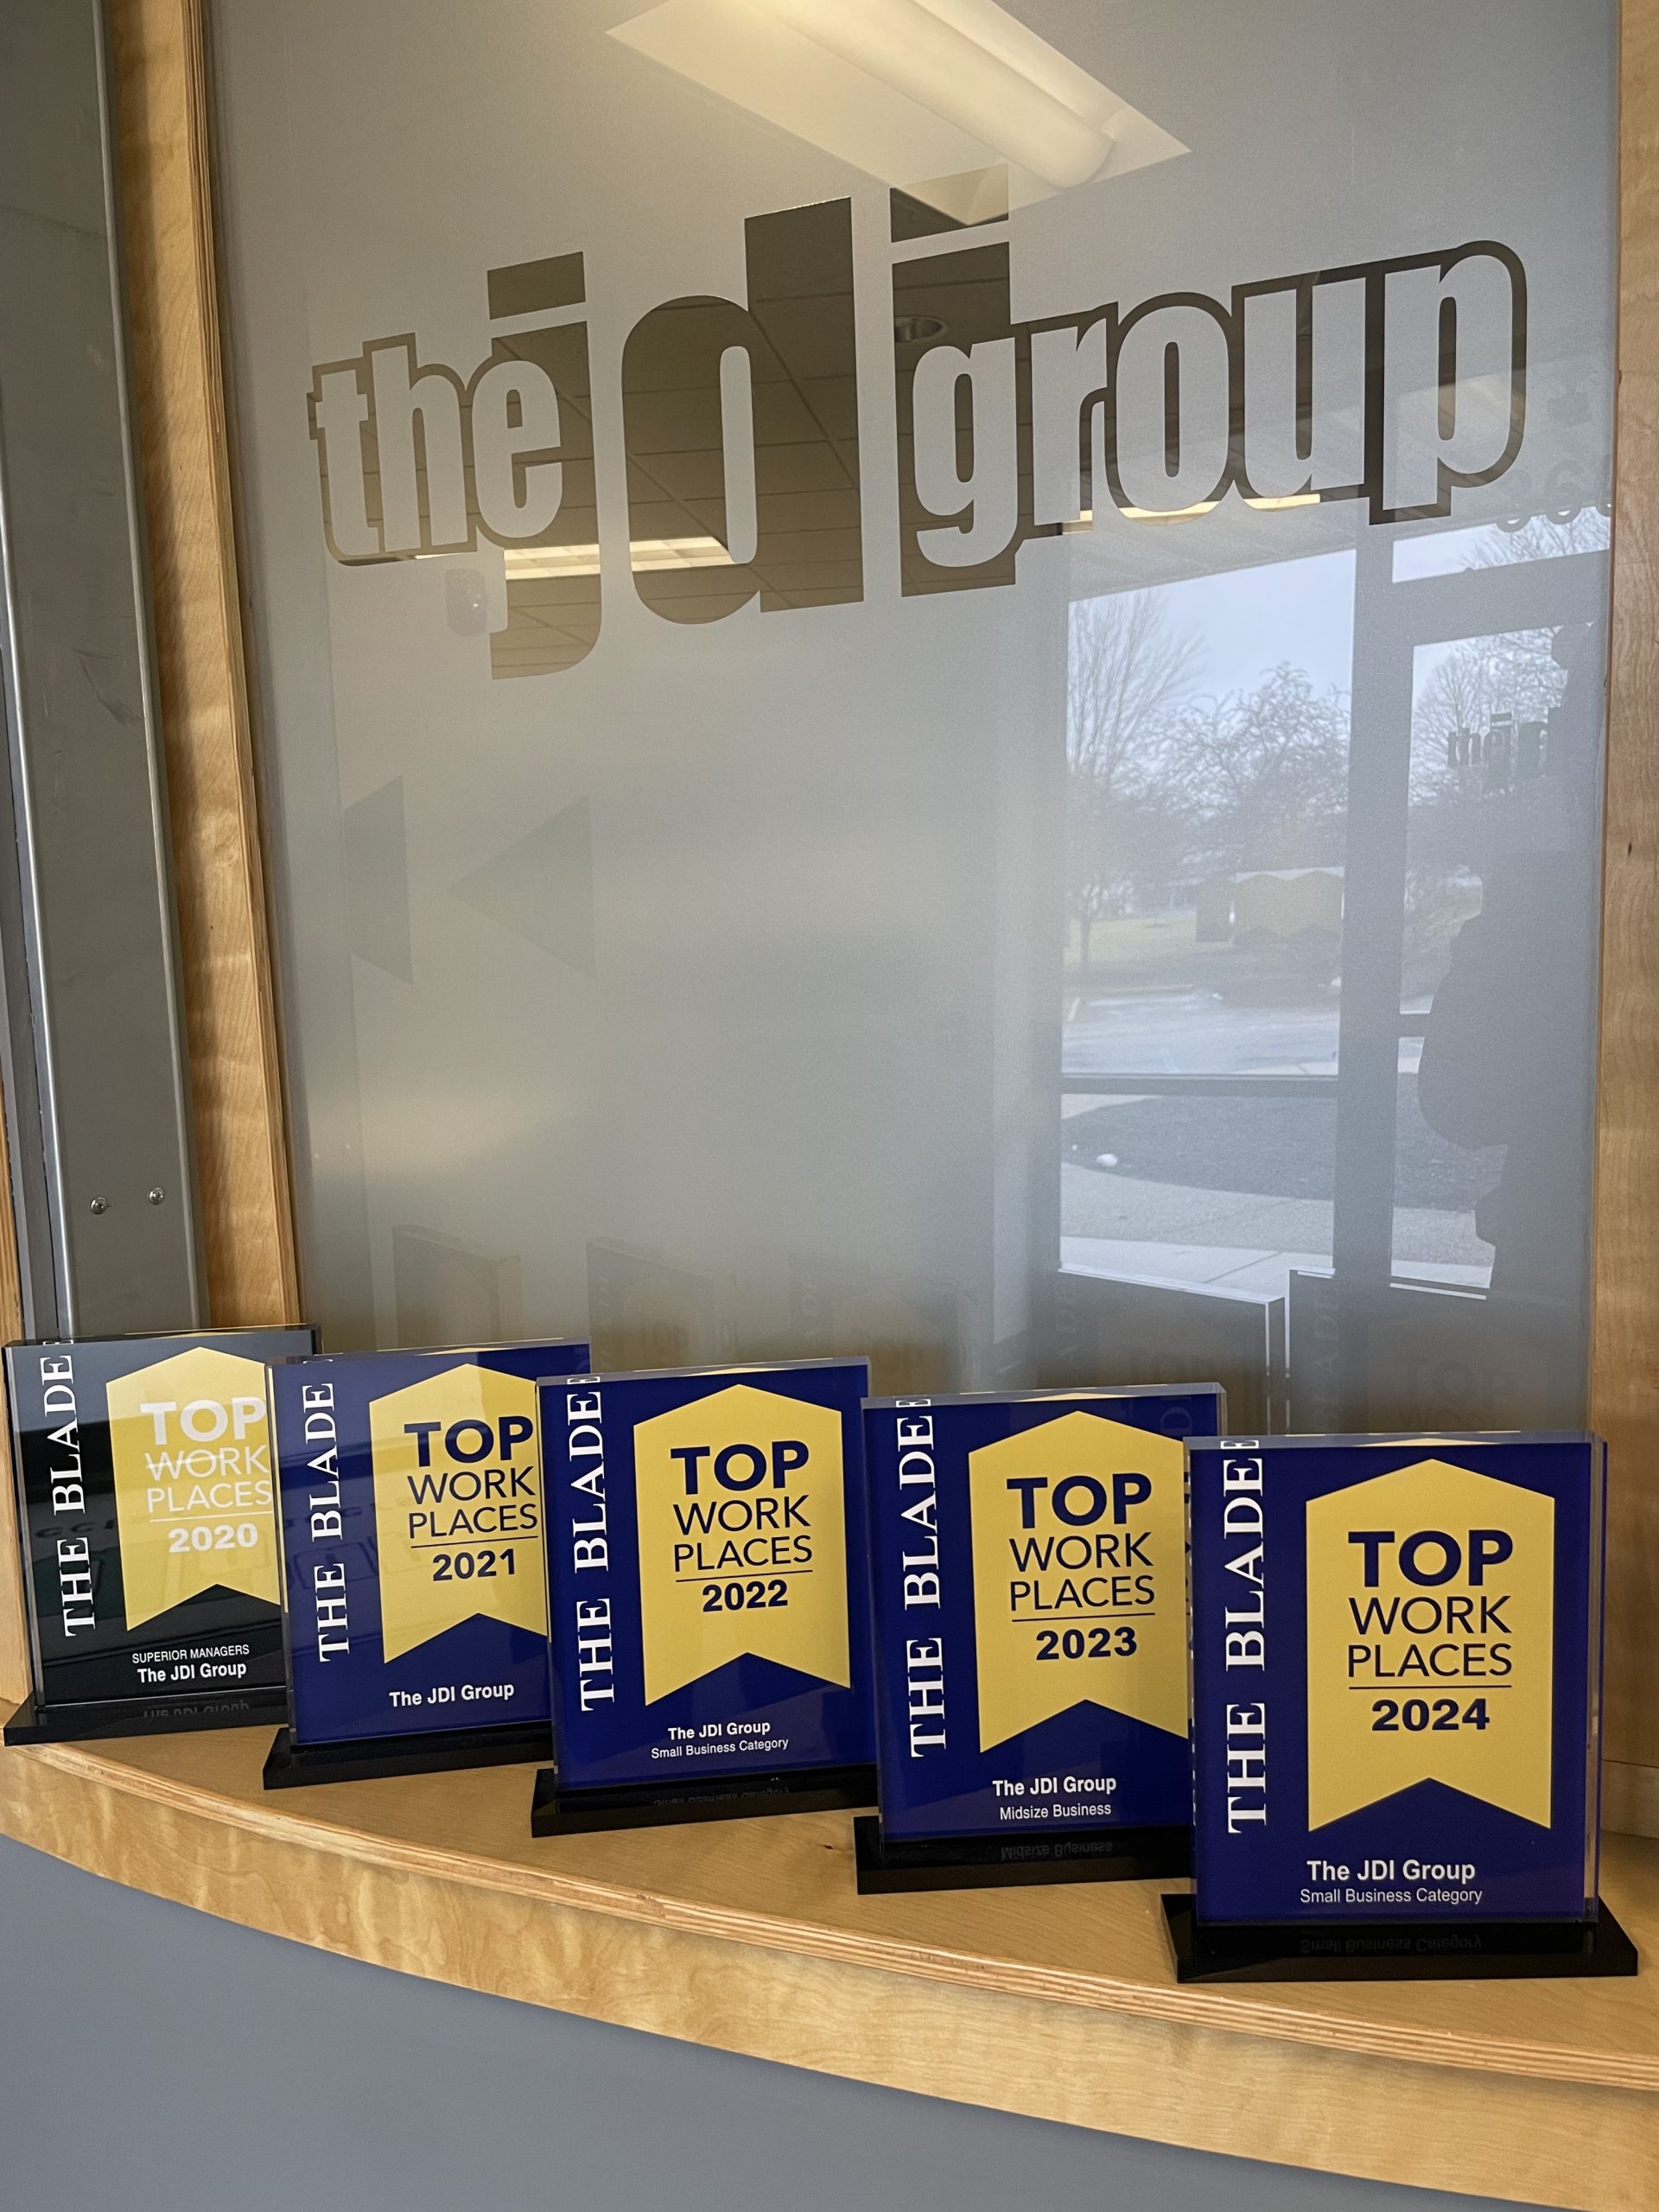 The JDI Group - The Blade Top Workplace Awards